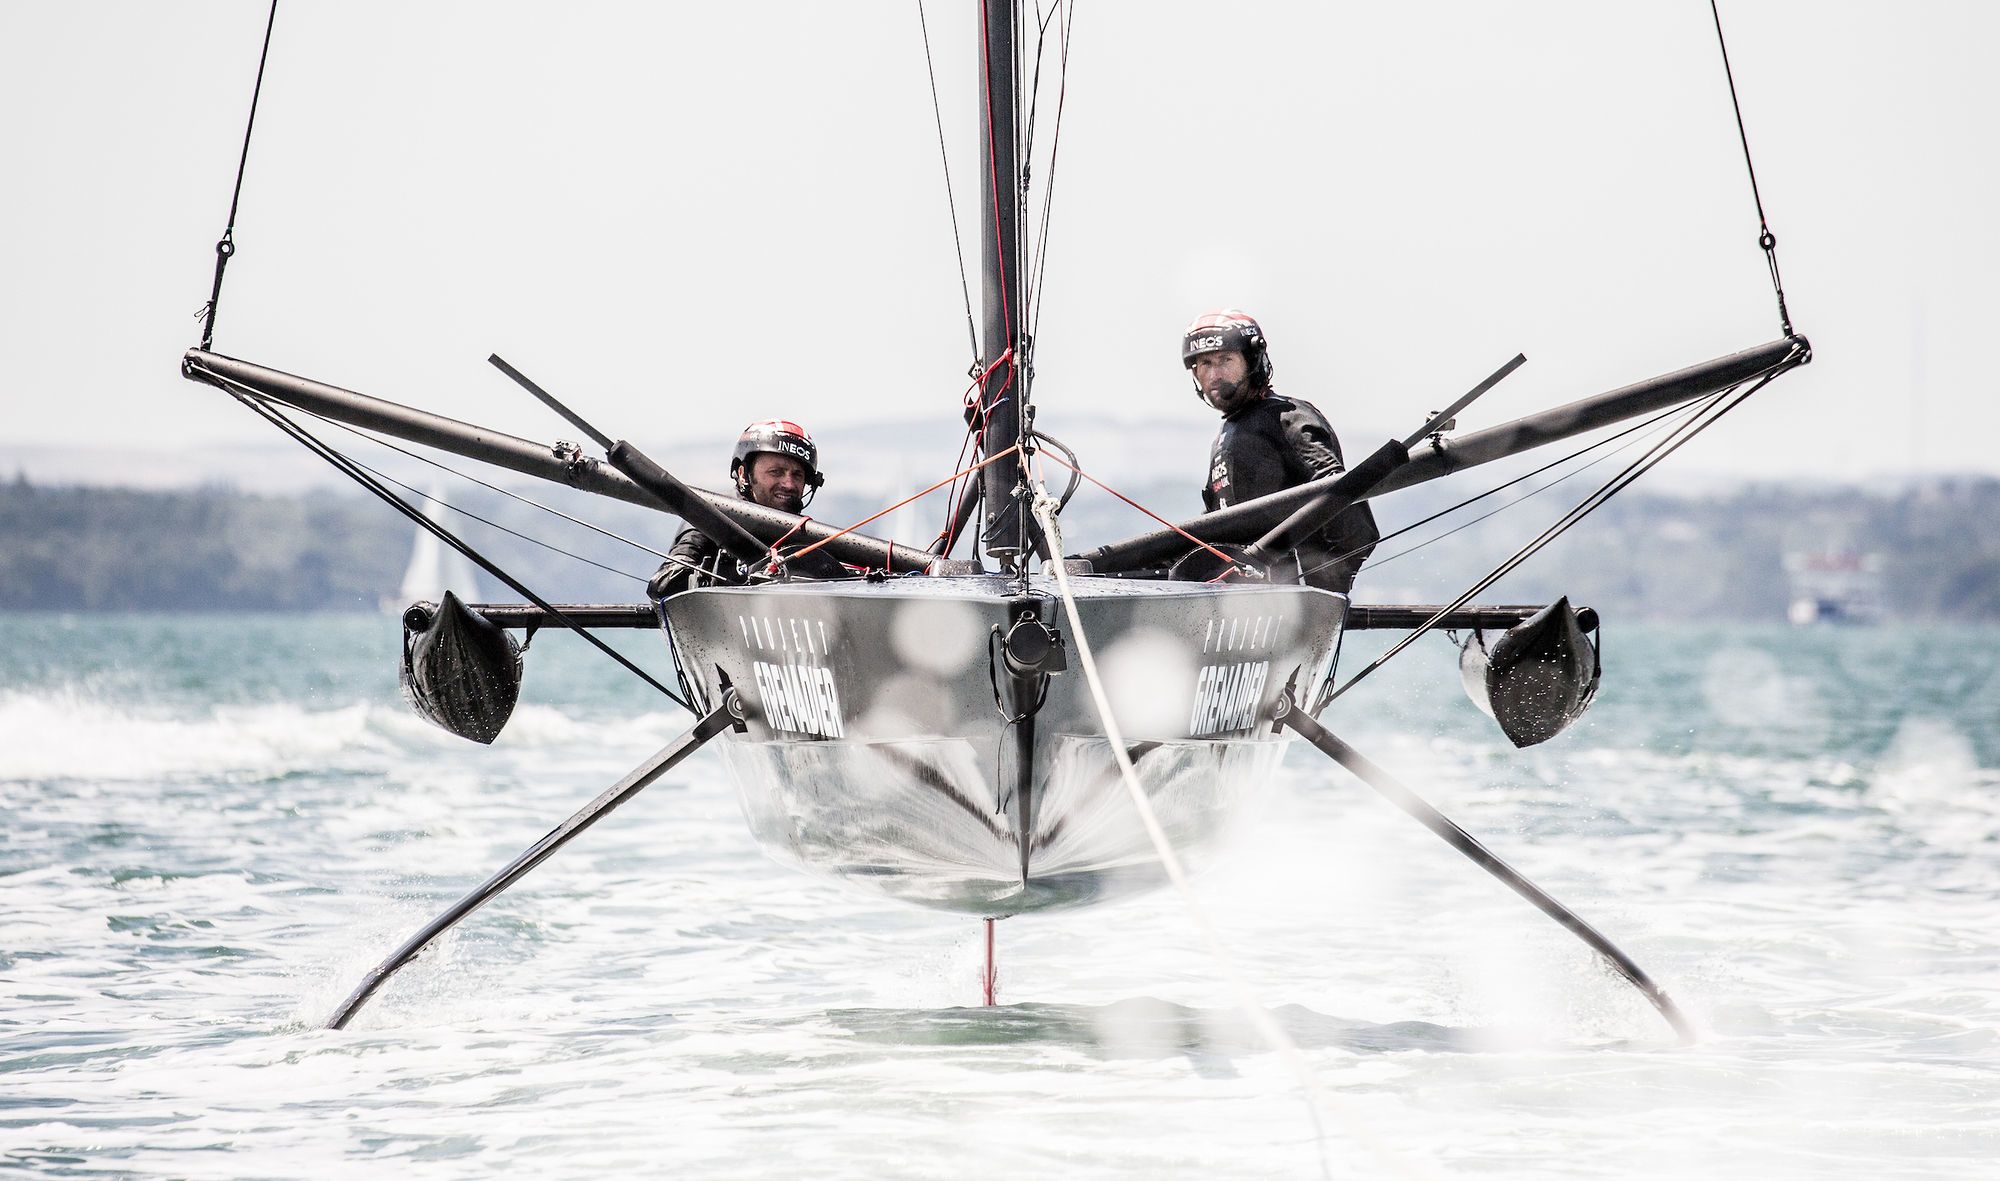 The Boat That Could Sink the America's Cup